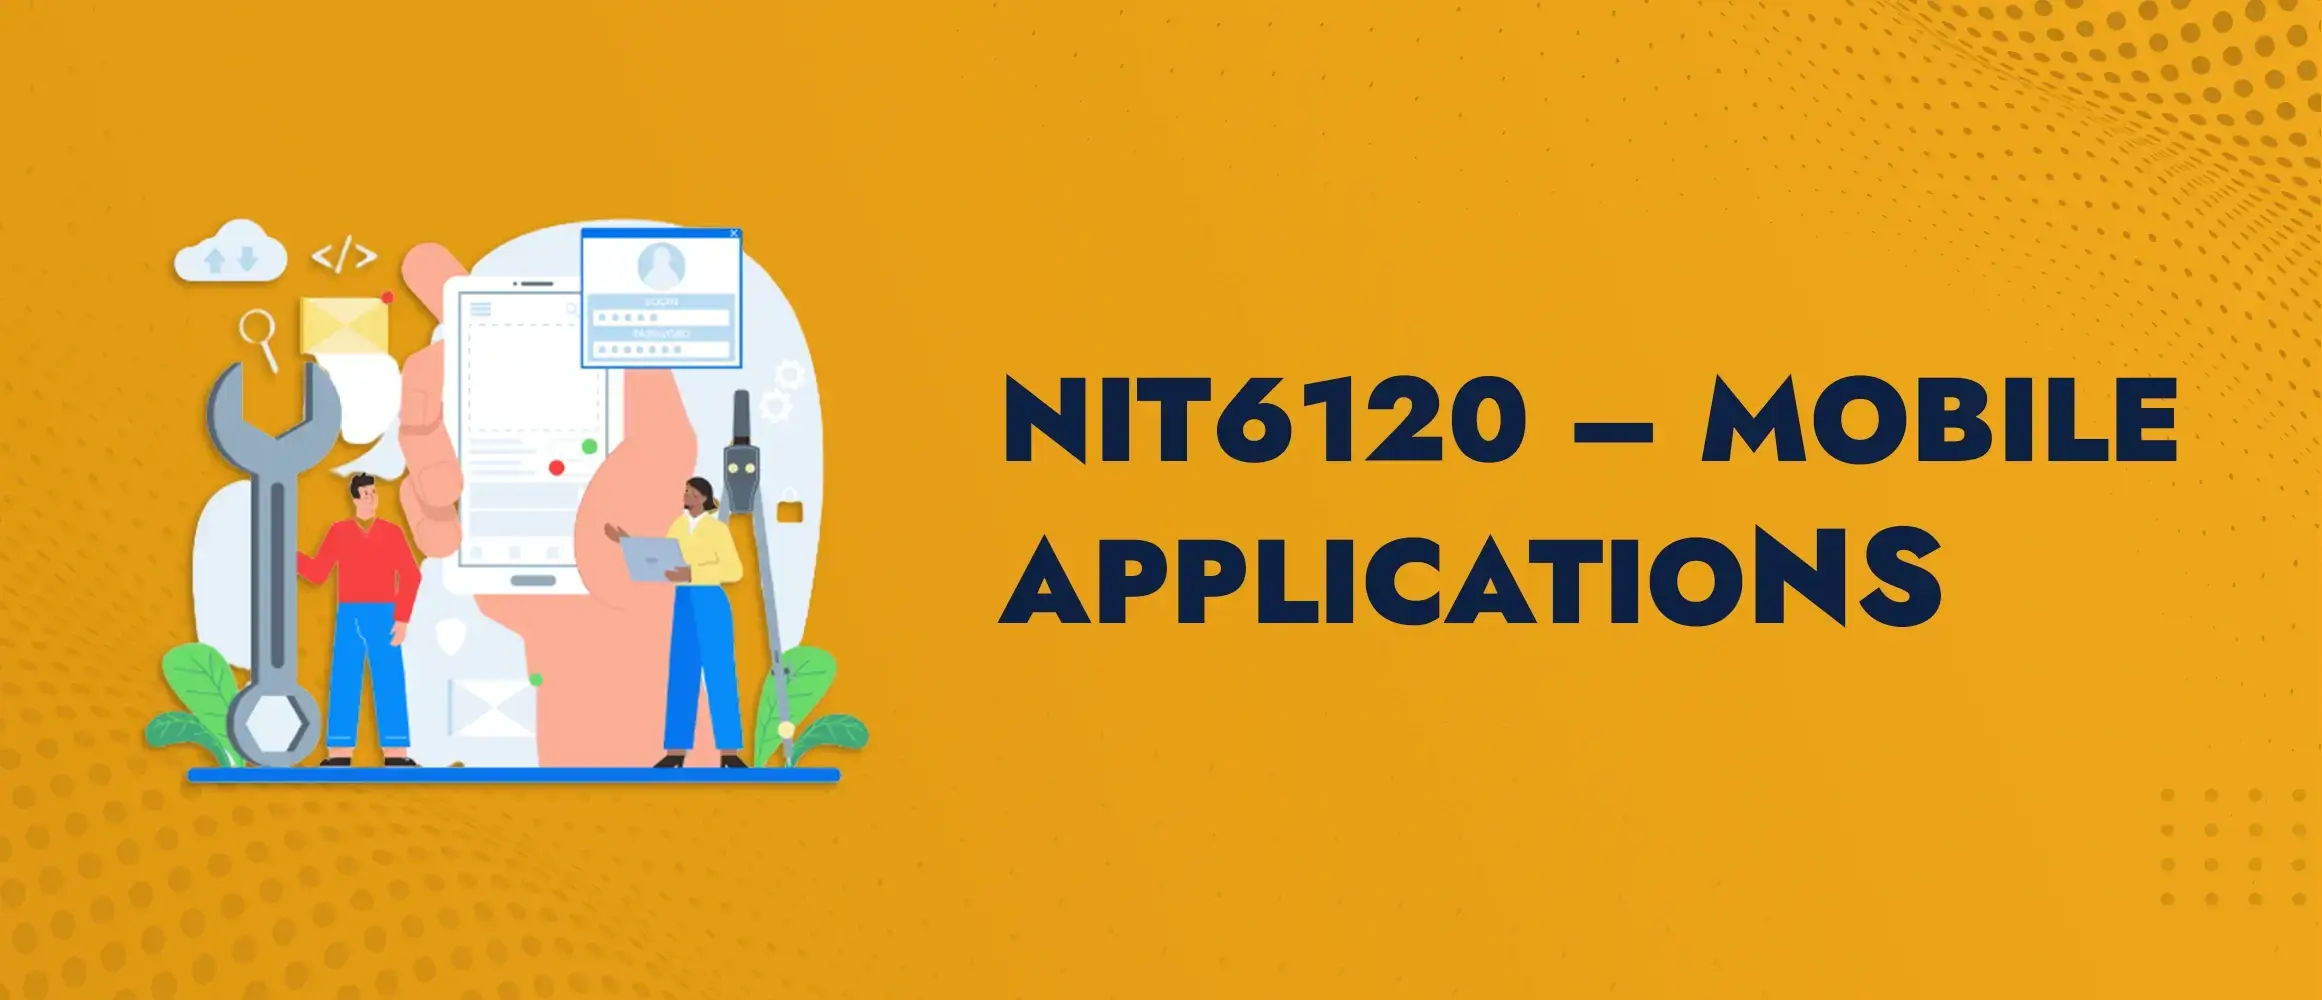 NIT6120 Mobile Applications